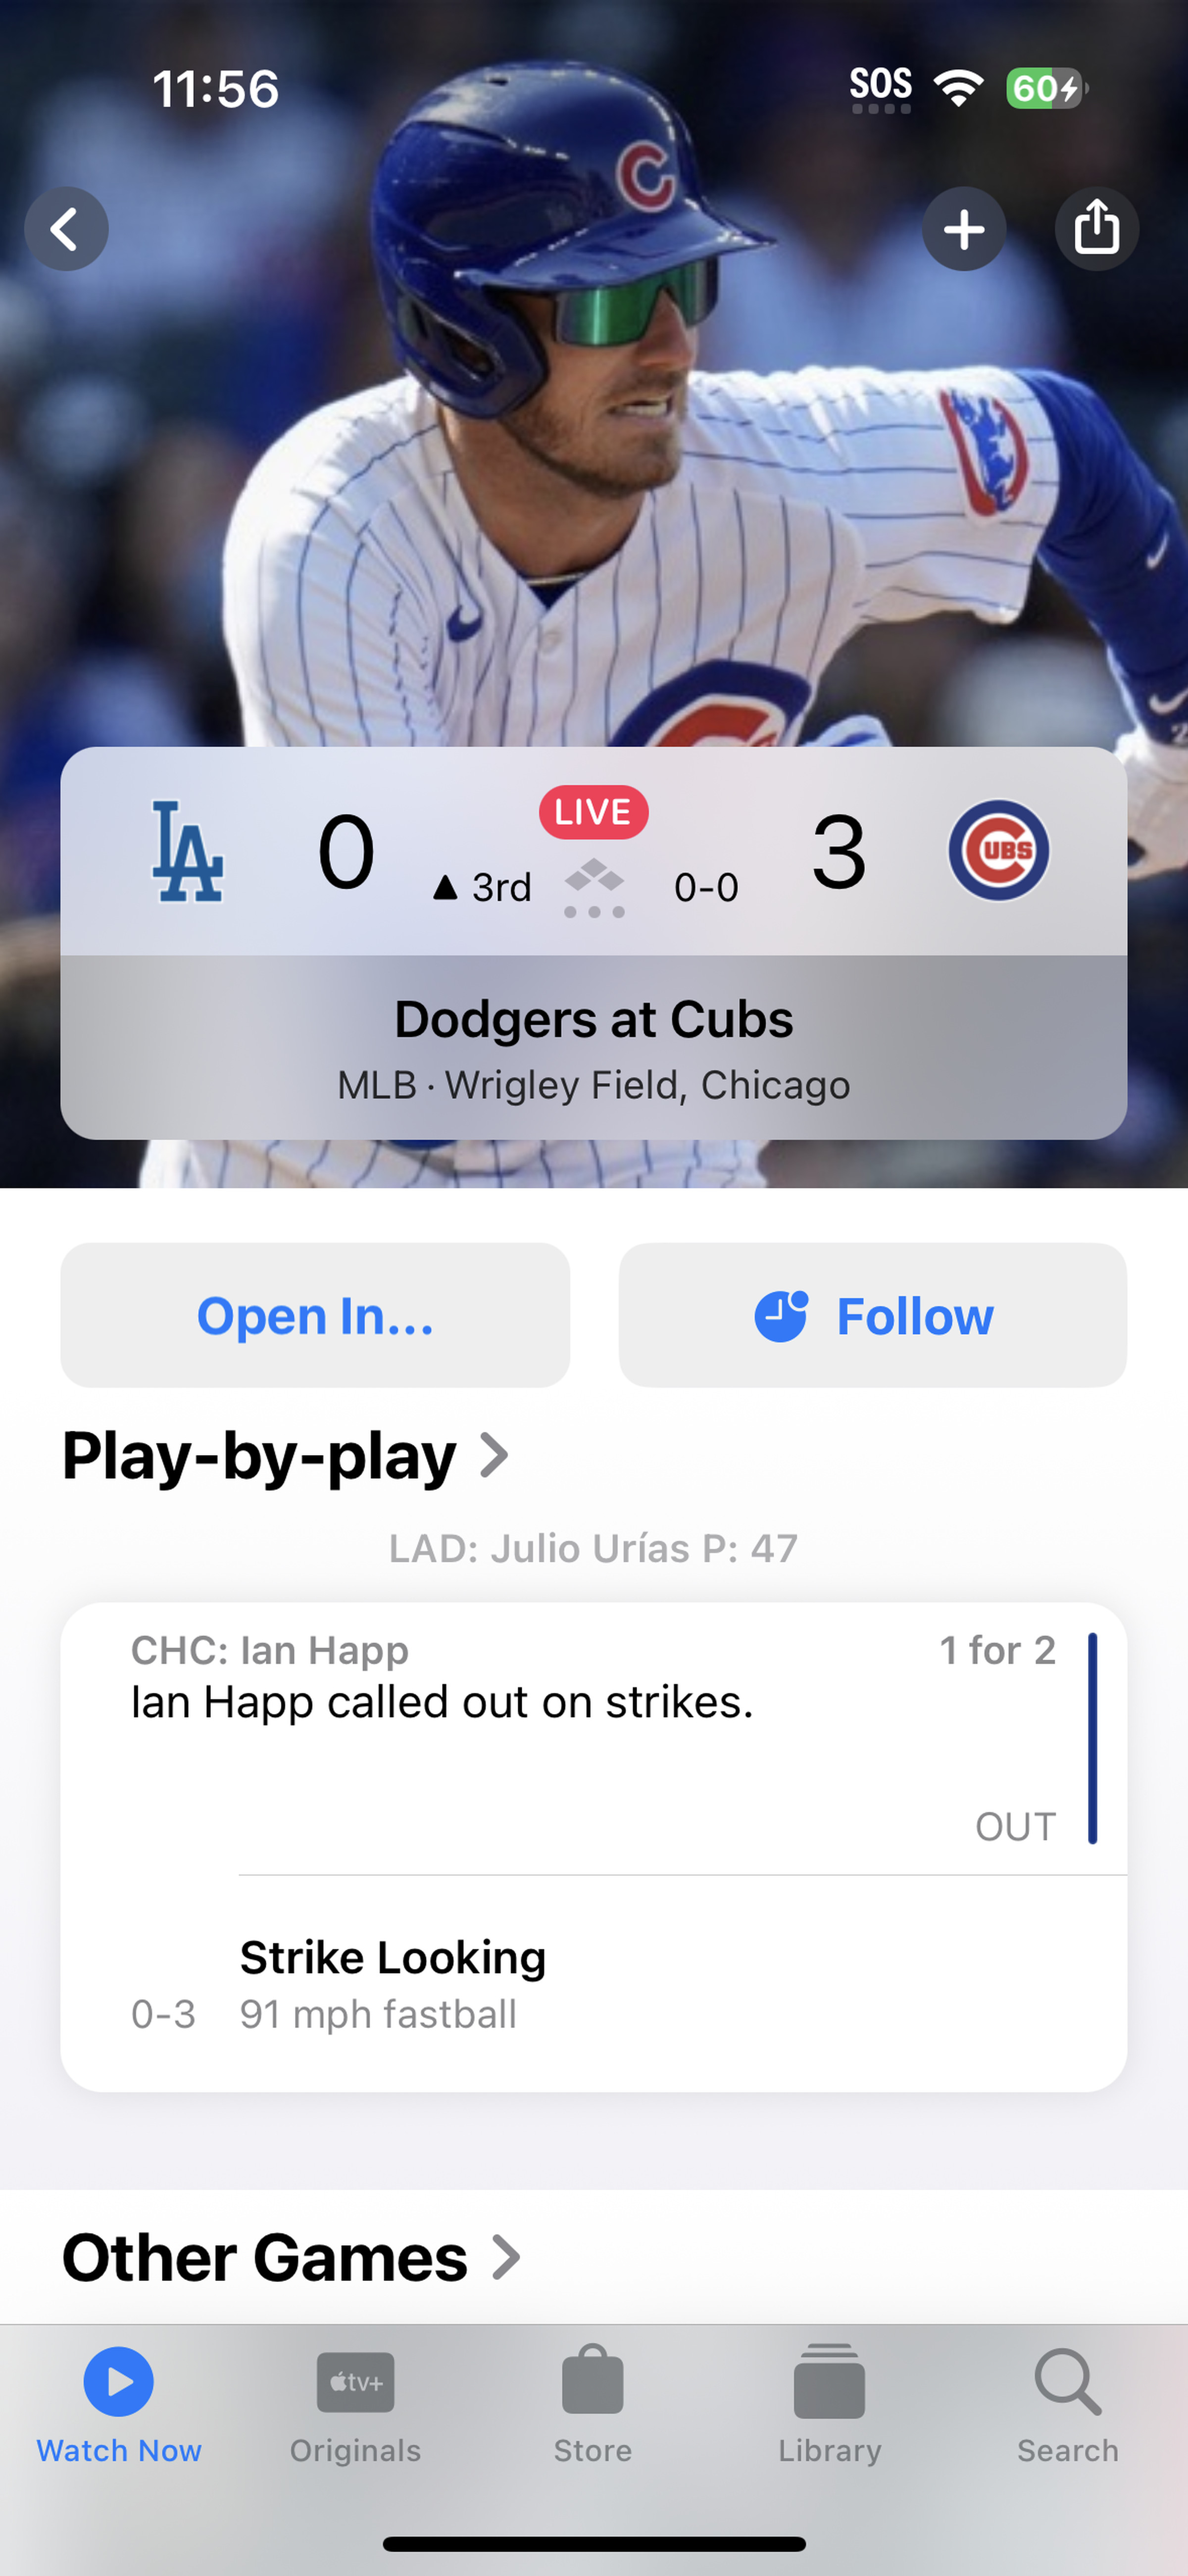 Screenshot of Apple TV app showing scores of a game between the Dodgers and Cubs.